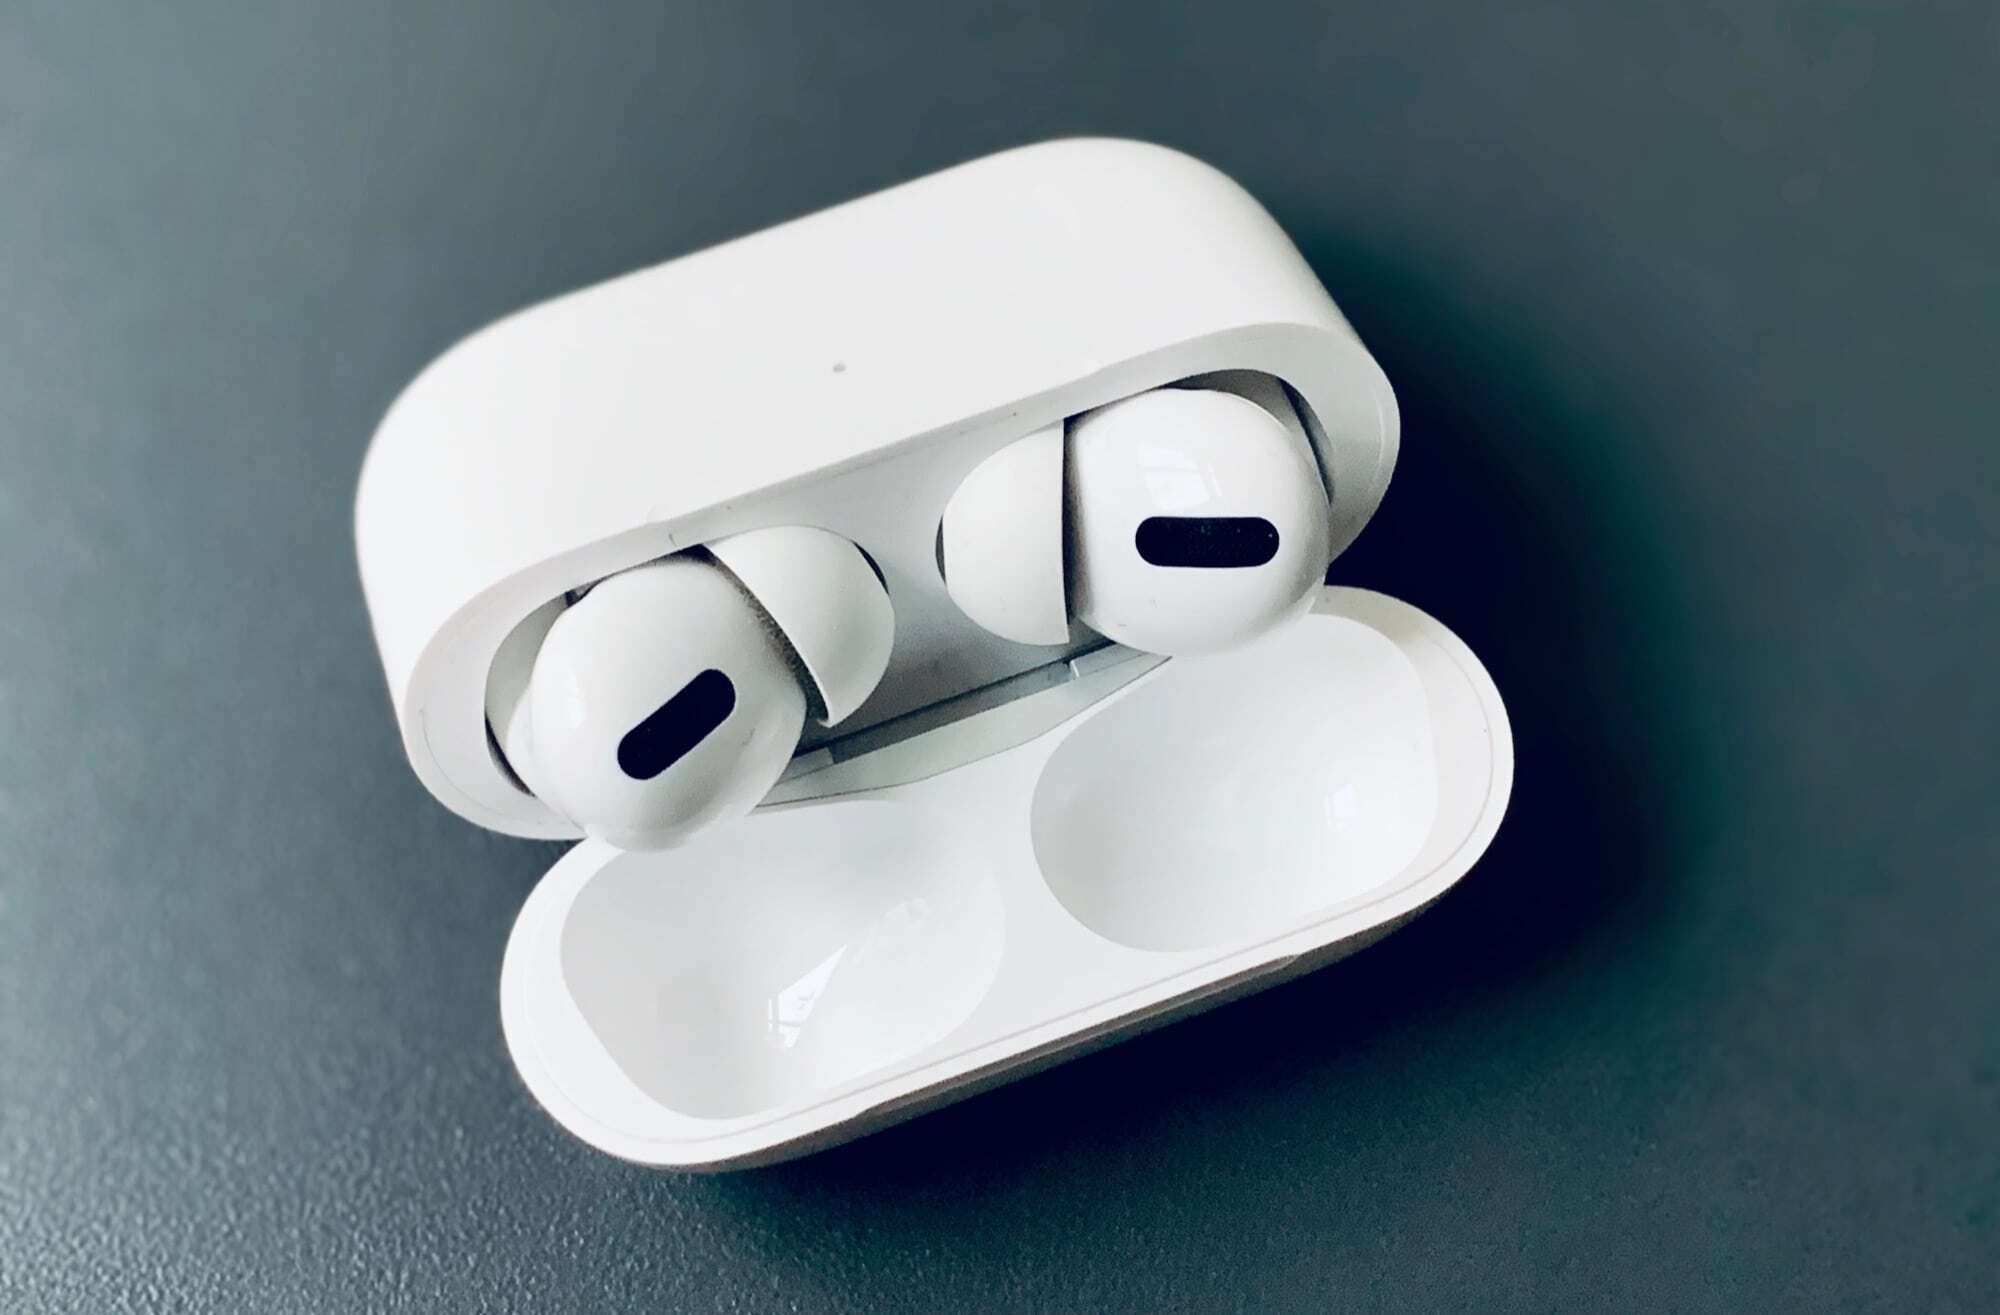 Iphone air pro. AIRPODS Pro 2. AIRPODS Pro 6. AIRPODS Pro 5. Apple AIRPODS Pro 1.